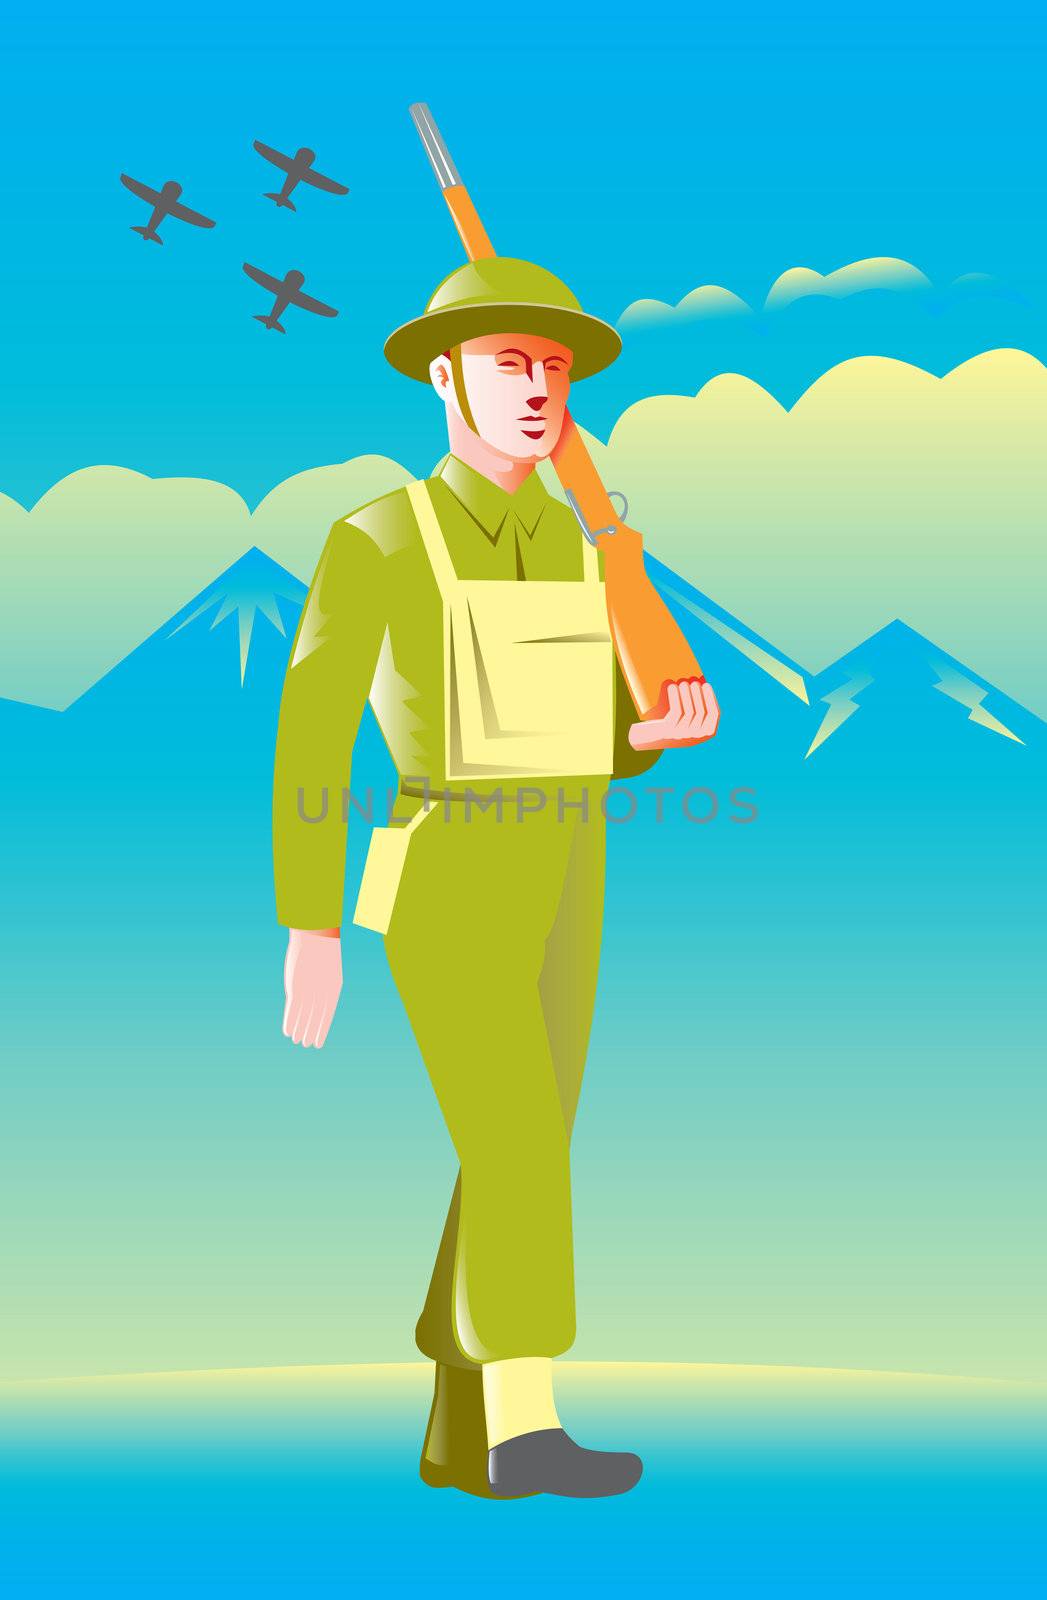 illustration of a British World War two soldier with rifle marching with airplanes flying, mountains and clouds in background